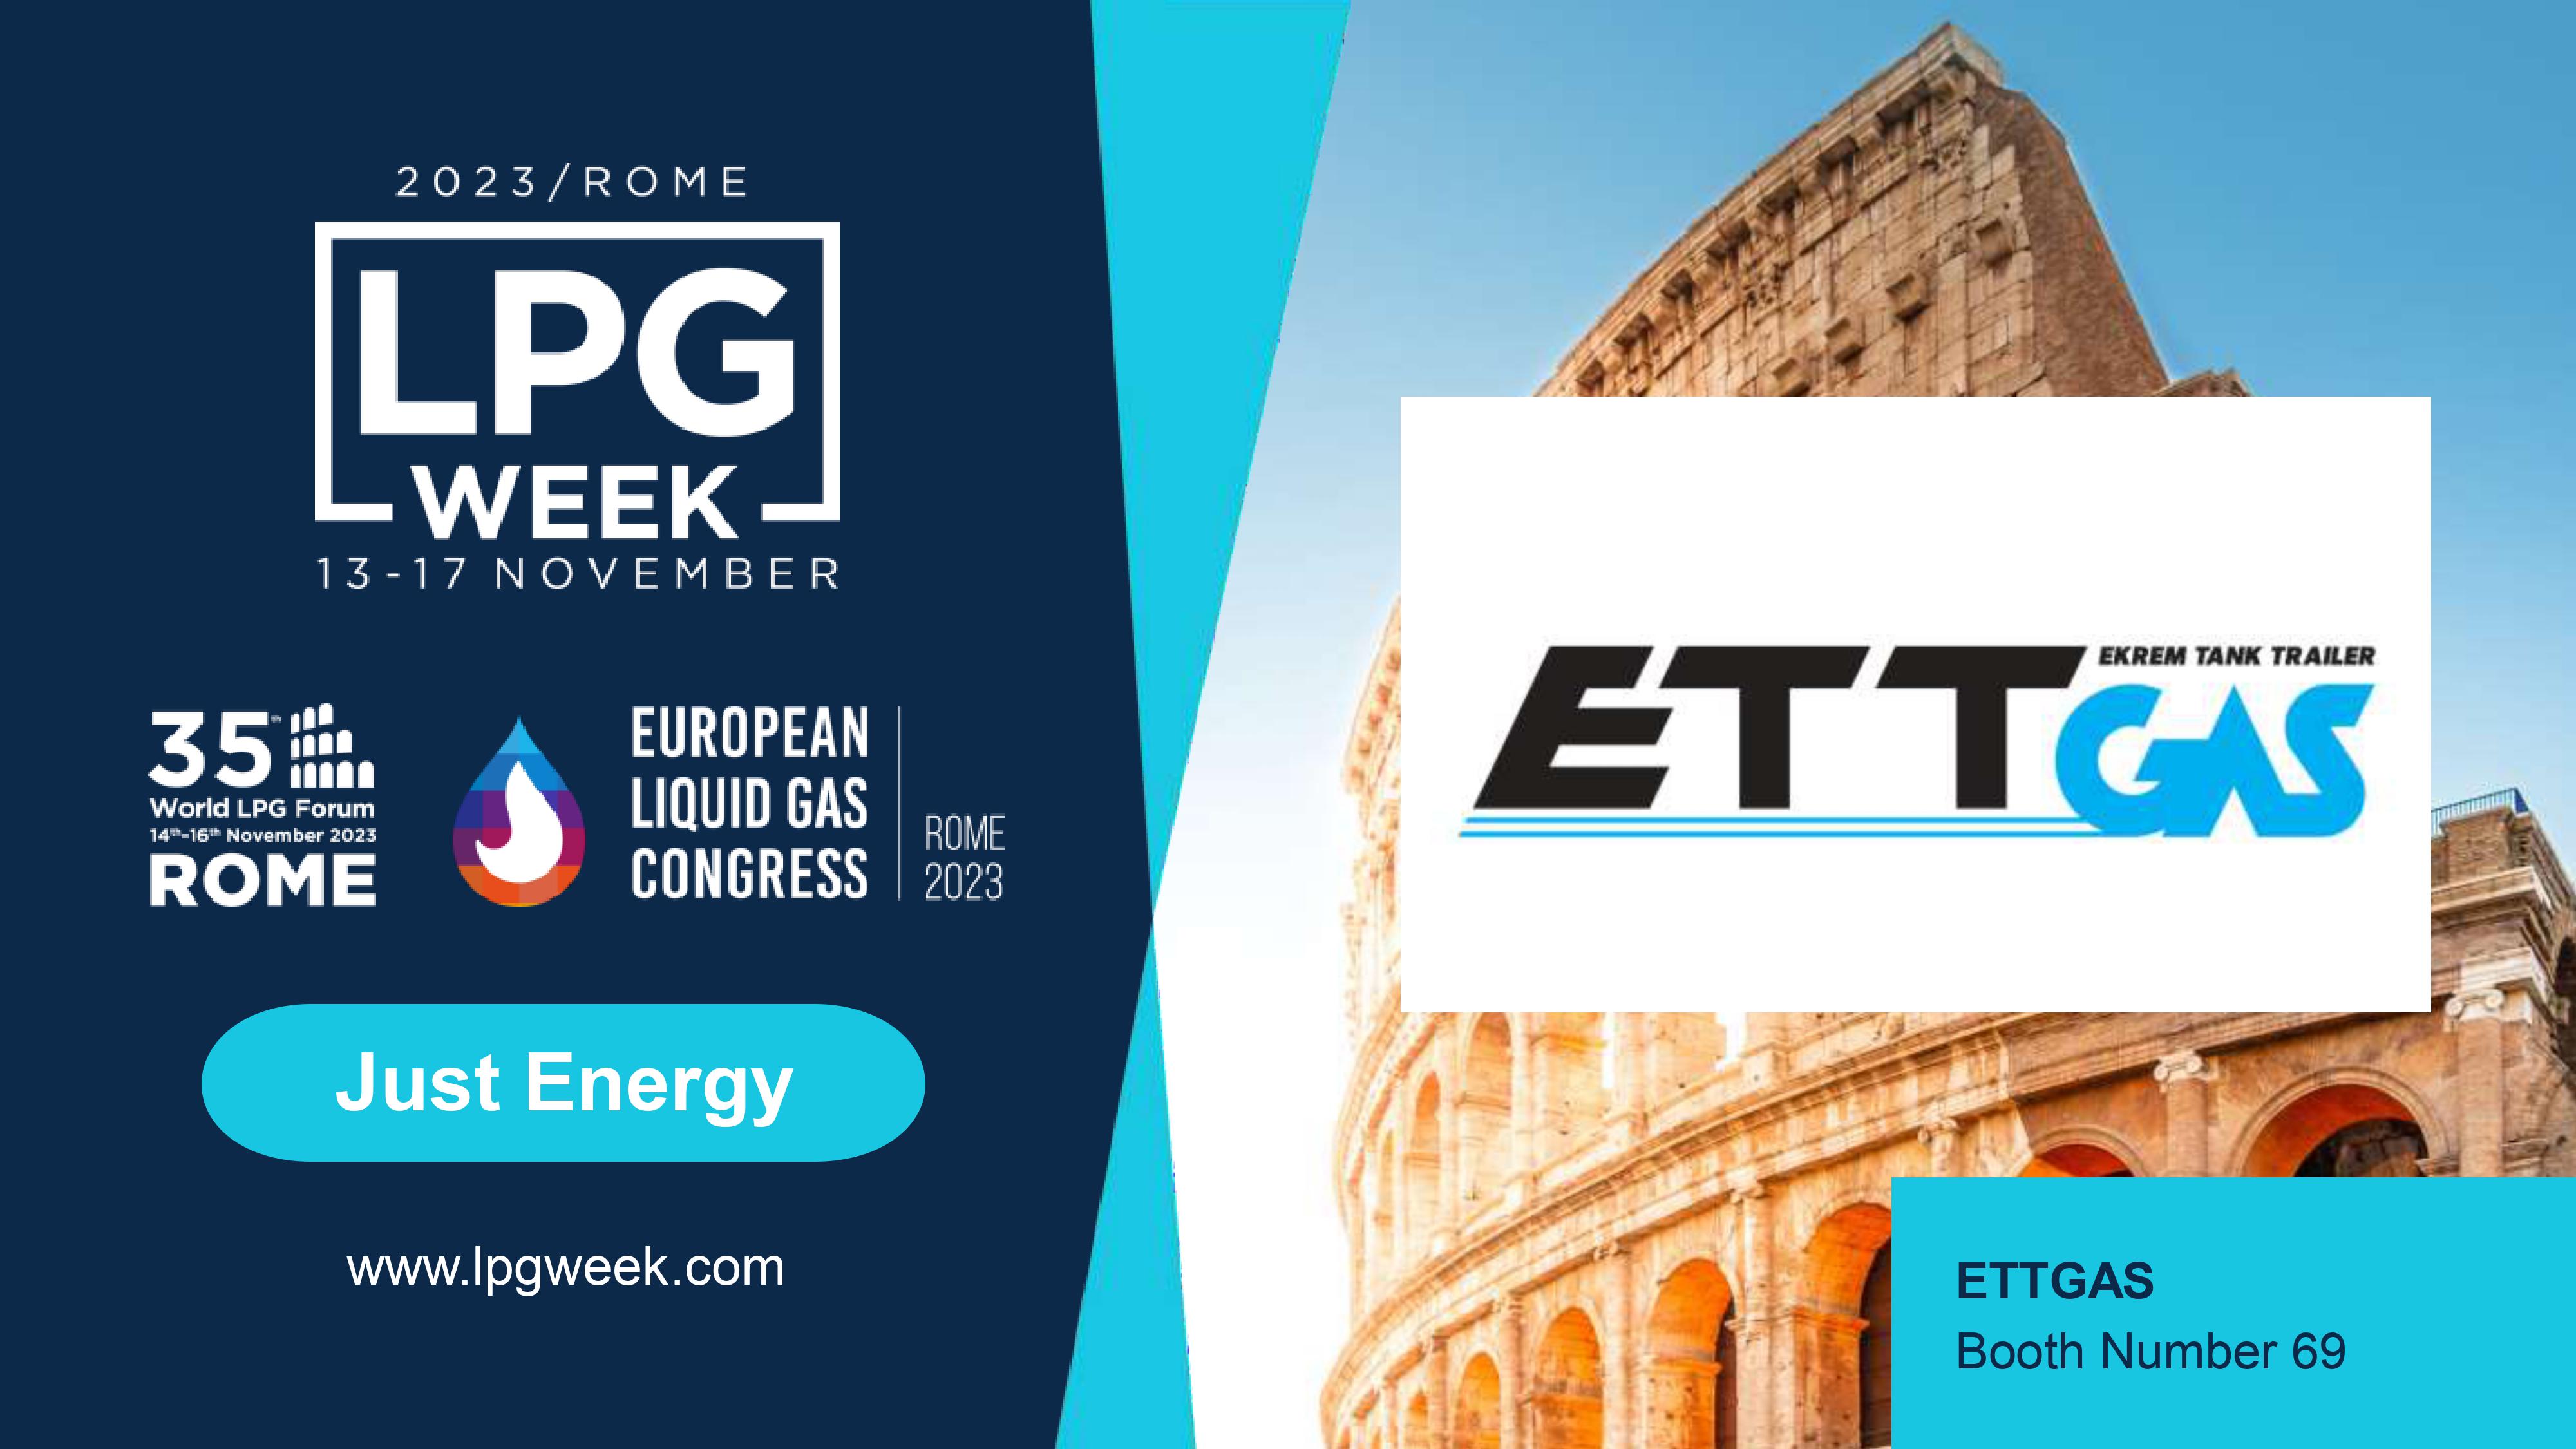 2023 Rome LPG WEEK European Liquid Gas Congress 35. World Lpg Forum - Rome Italy 13-17 November Ettgas Booth Number:69 We are kindly invite you to visit our booth at Rome ETTGAS World LPG Association exhibition